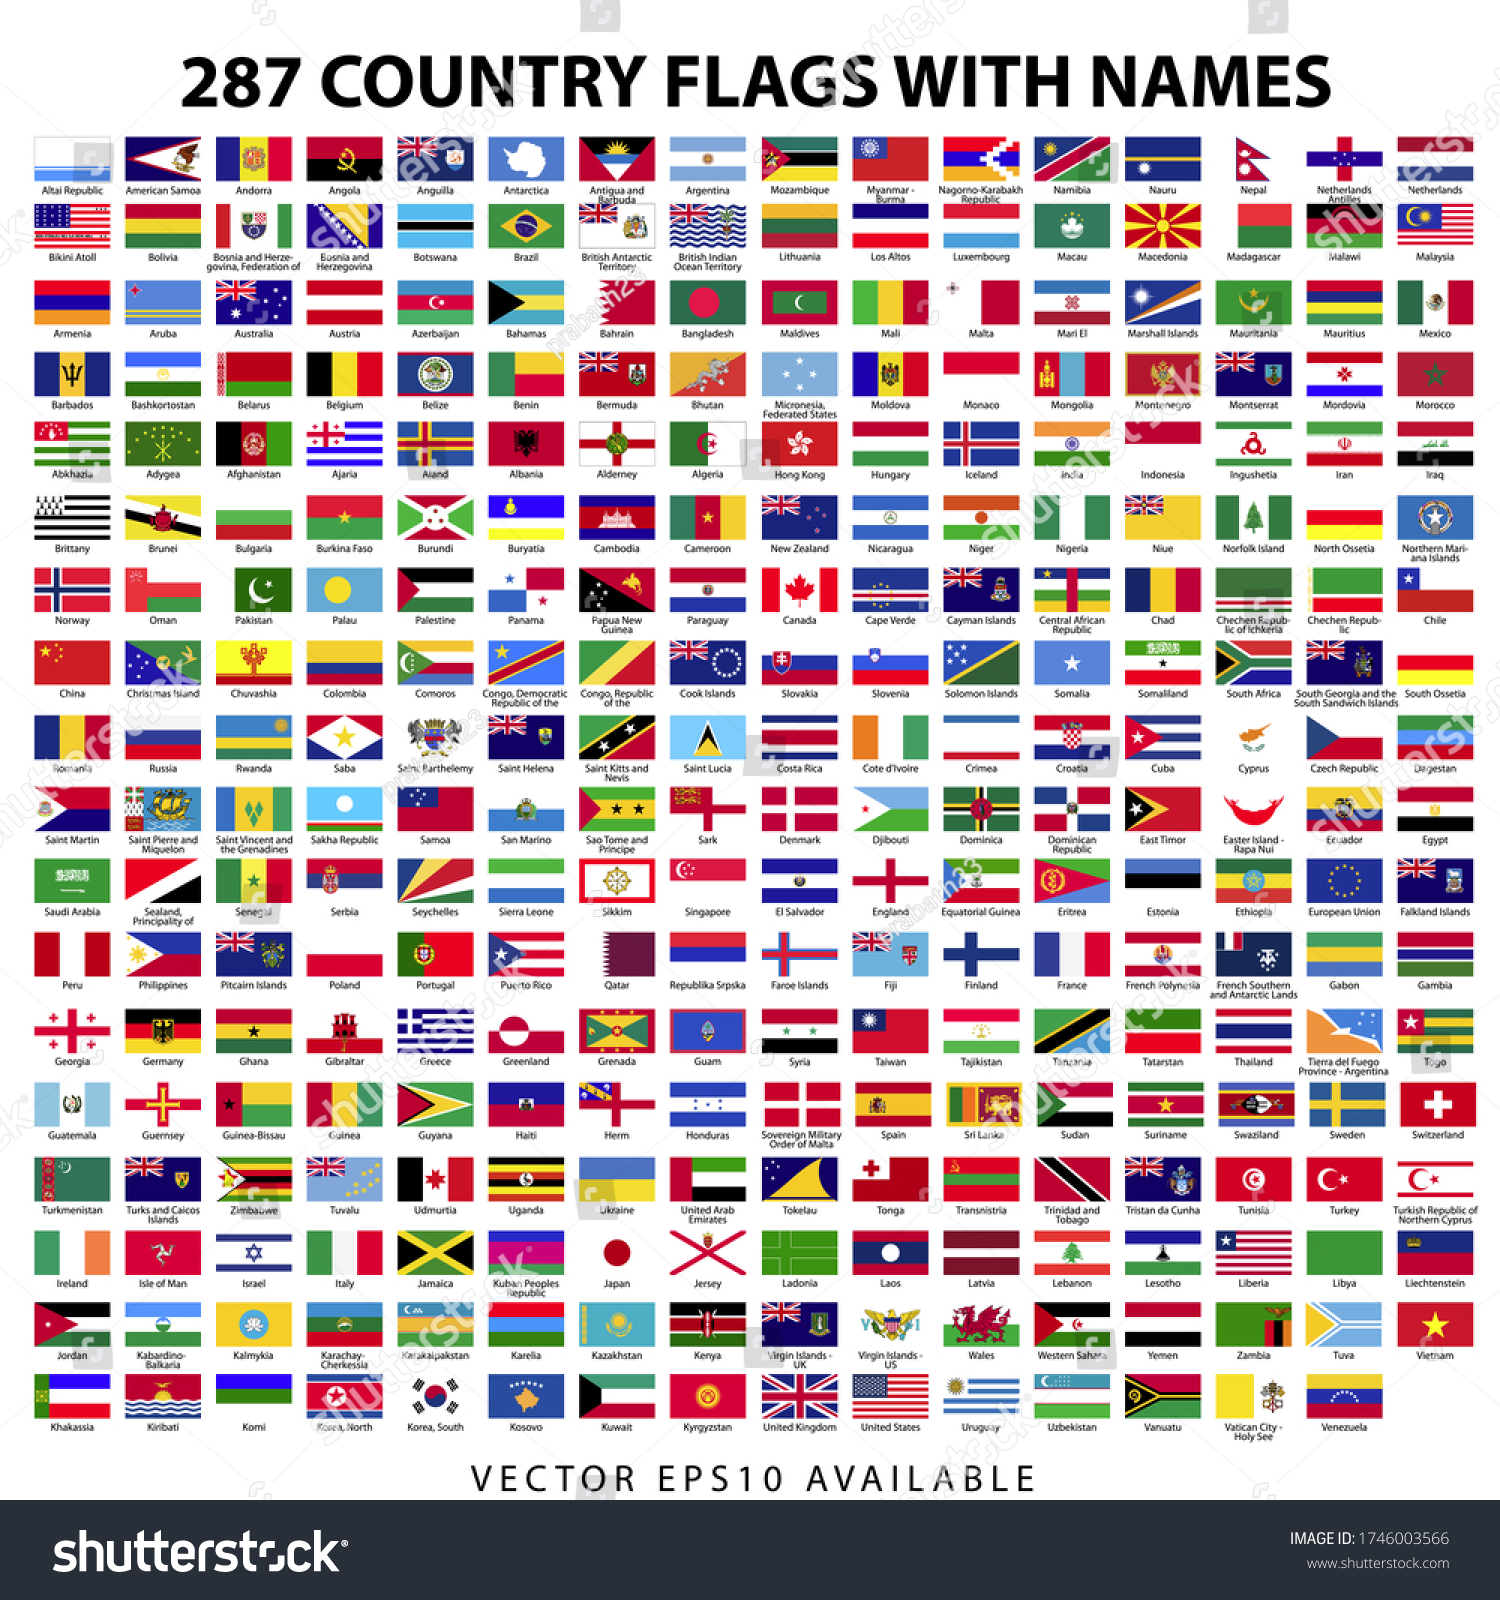 287-world-country-flags-with-names-flat-icon-royalty-free-stock